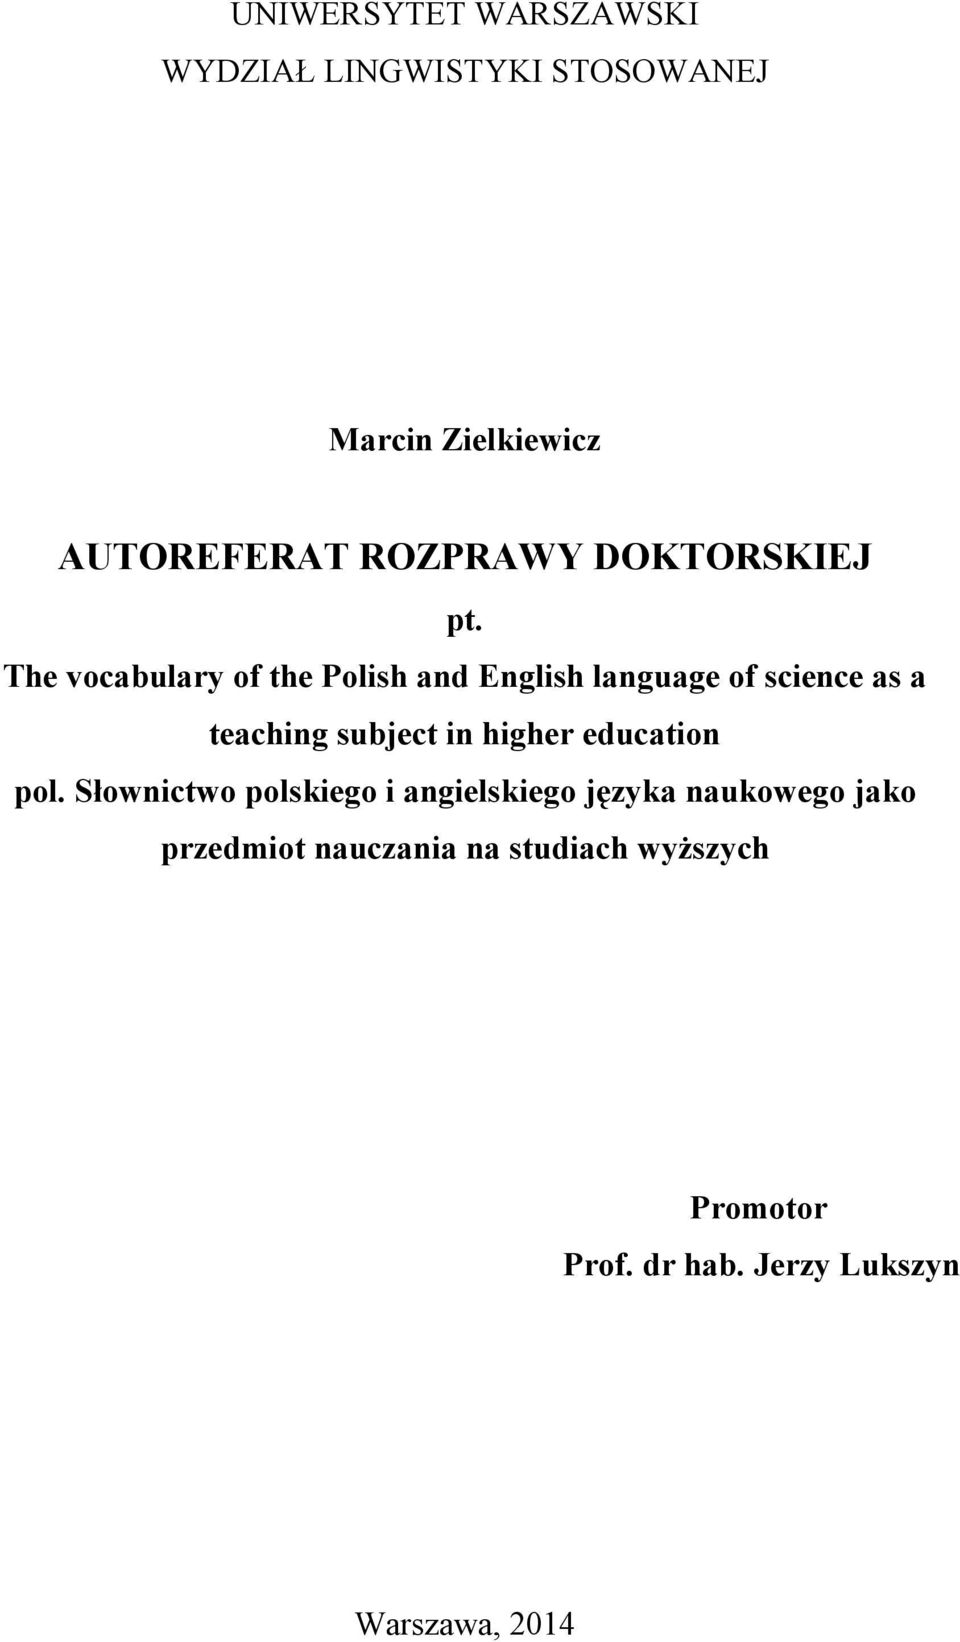 The vocabulary of the Polish and English language of science as a teaching subject in